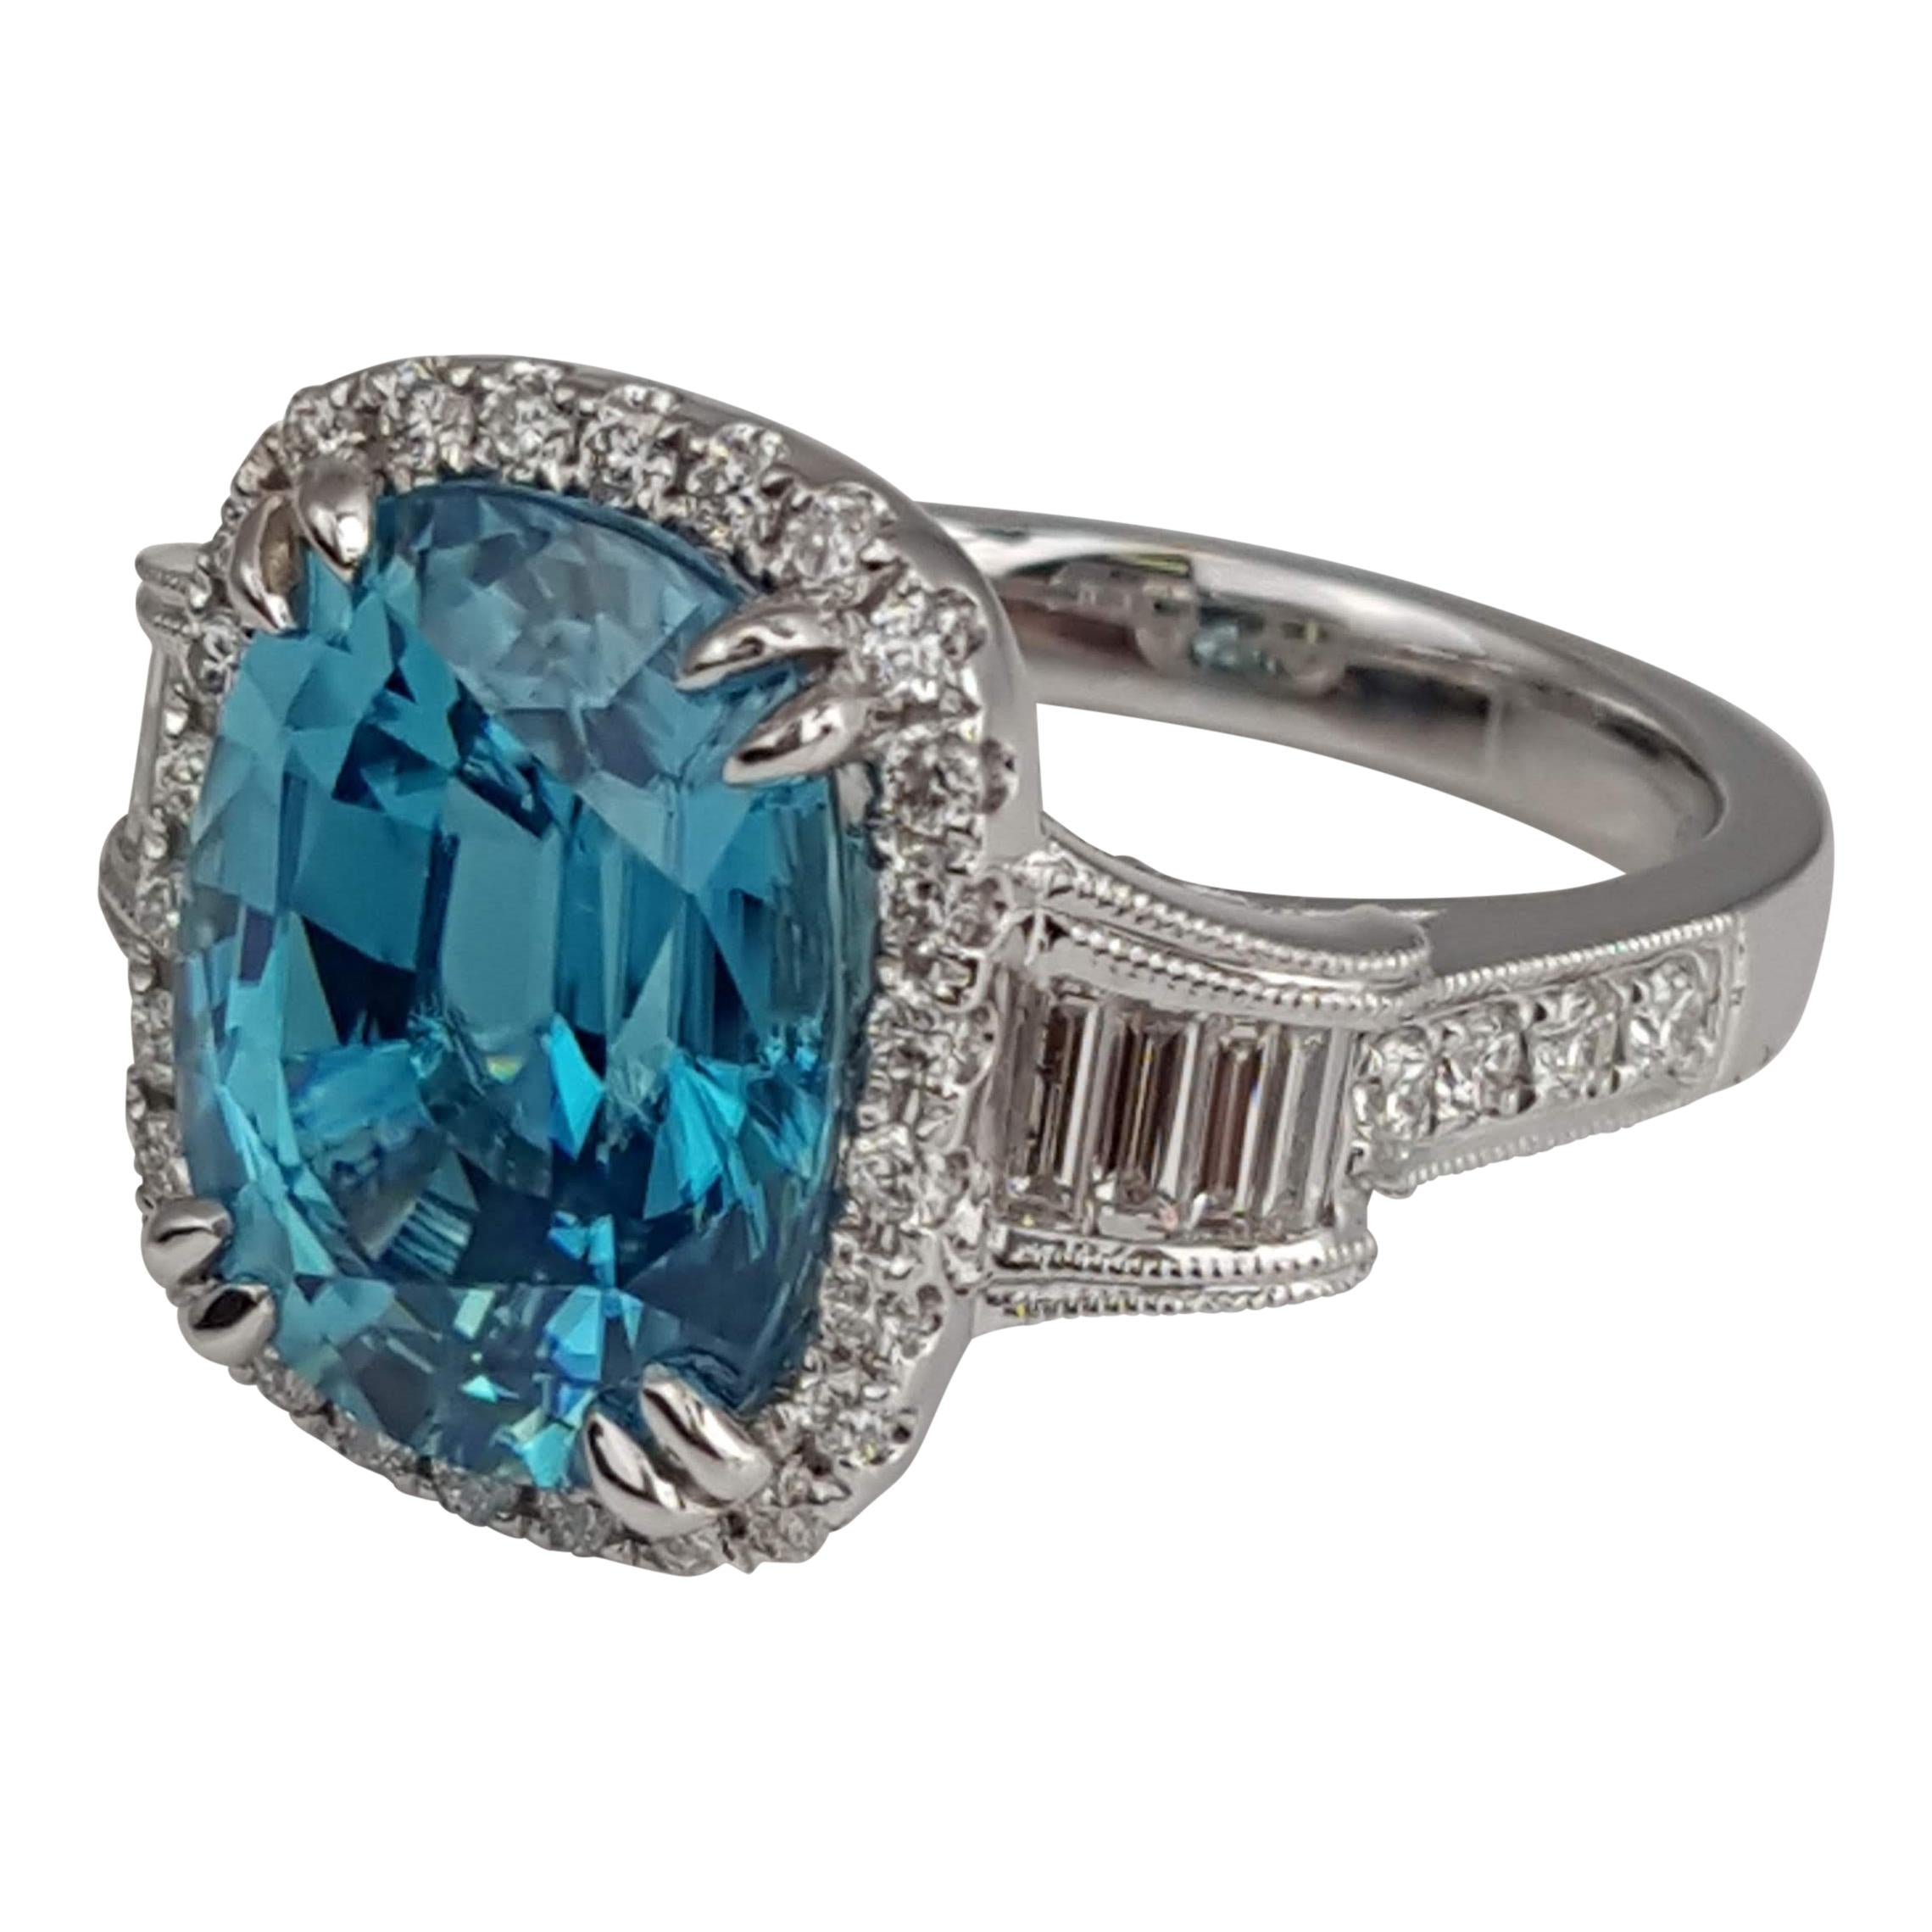 (DiamondTown) With a 9.95 carat oval cut Blue Zircon center, embellished by 0.74 carats round and baguette diamonds, this ring has a simple elegance suited for every occasion.

Center: 
9.95 Carats Oval Cut Blue Zircon
34 Round Diamonds total 0.50